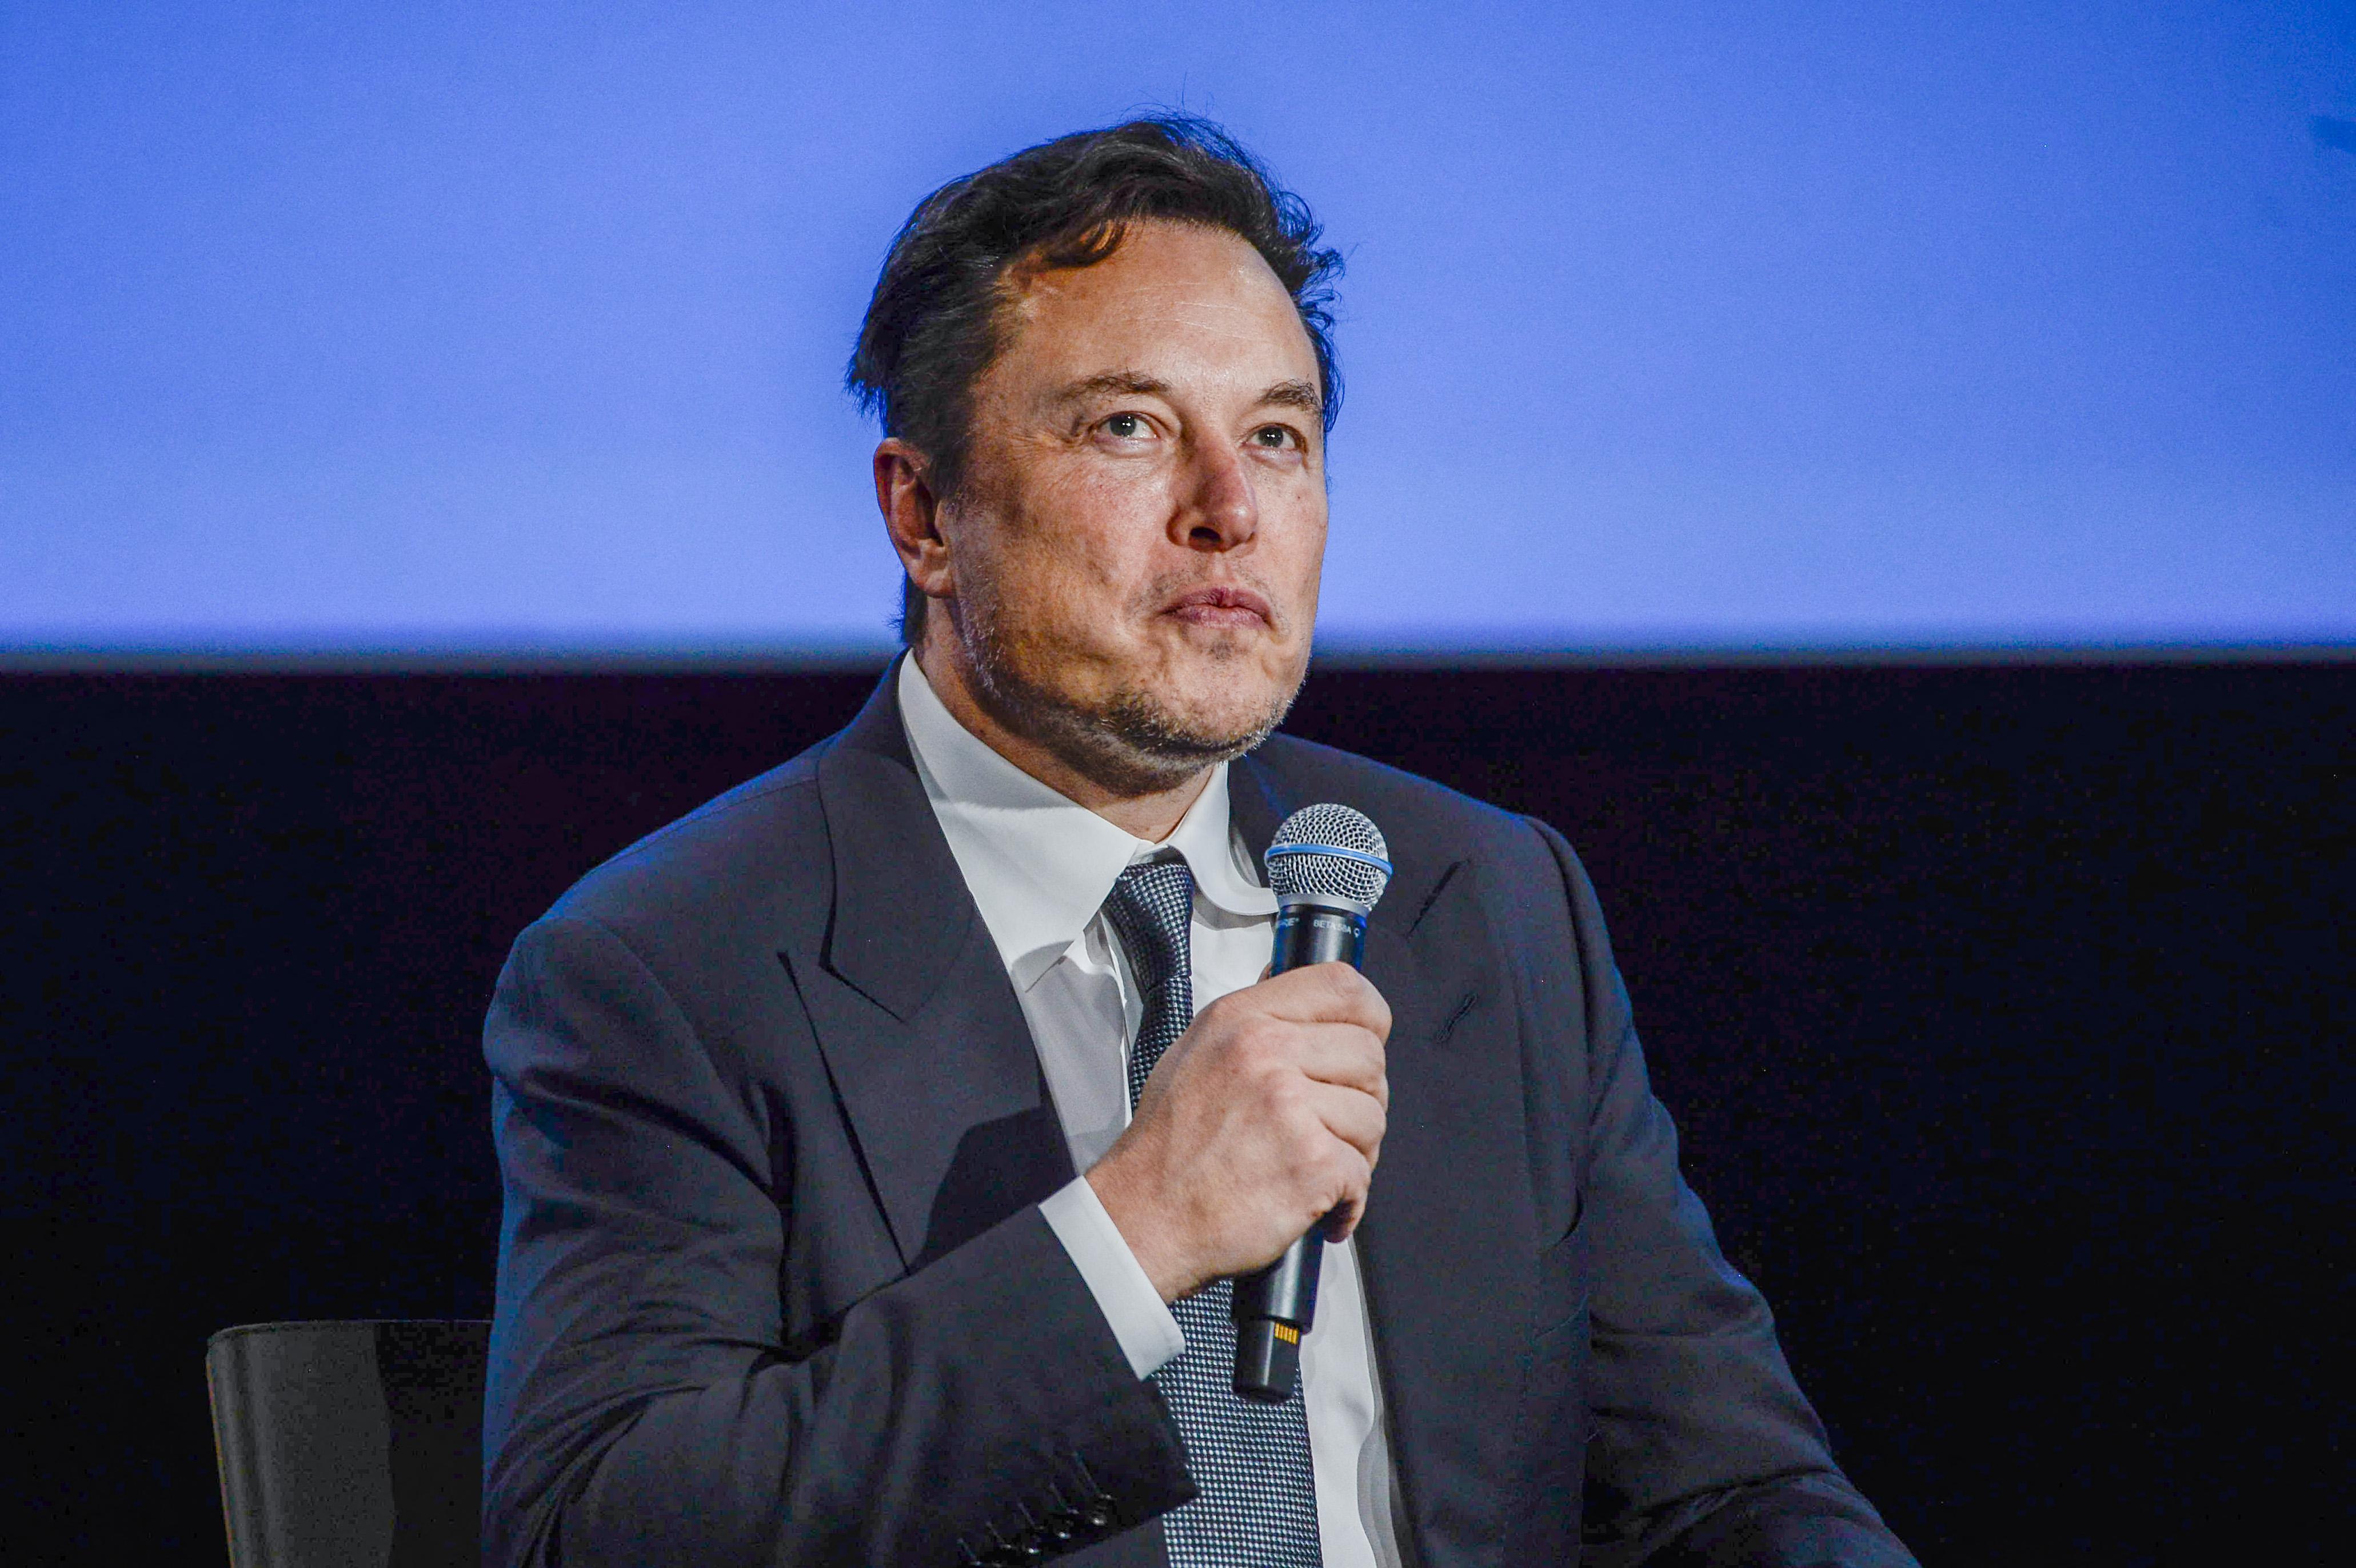 Elon Musk sitting on a stage and holding a microphone